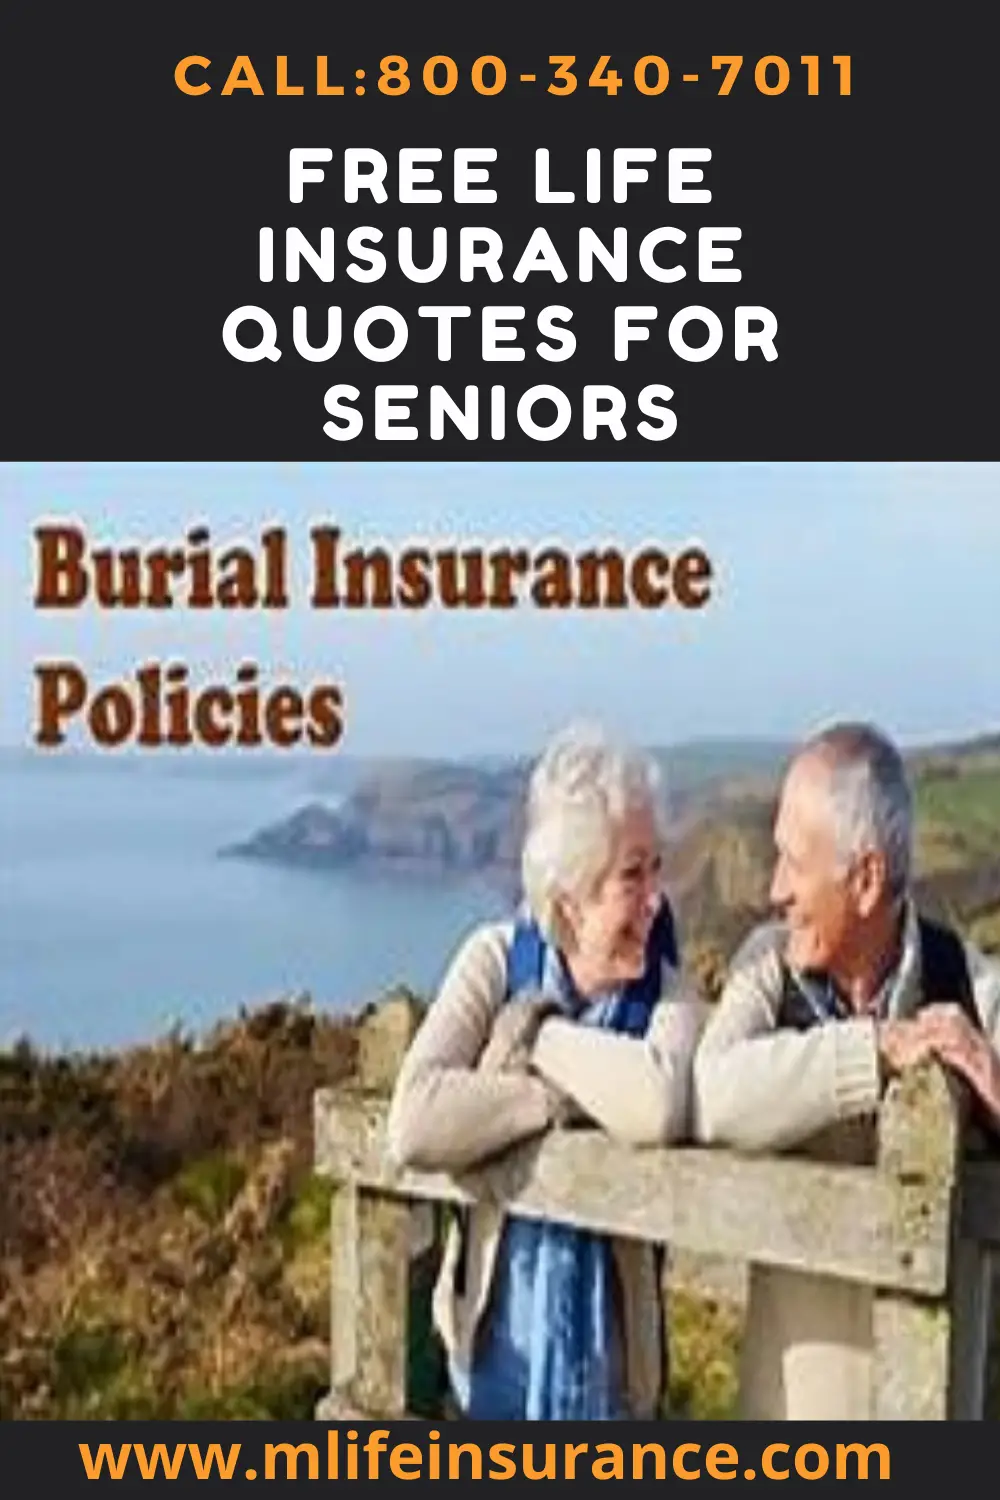 Thinking of Buying Life Insurance as a Senior?